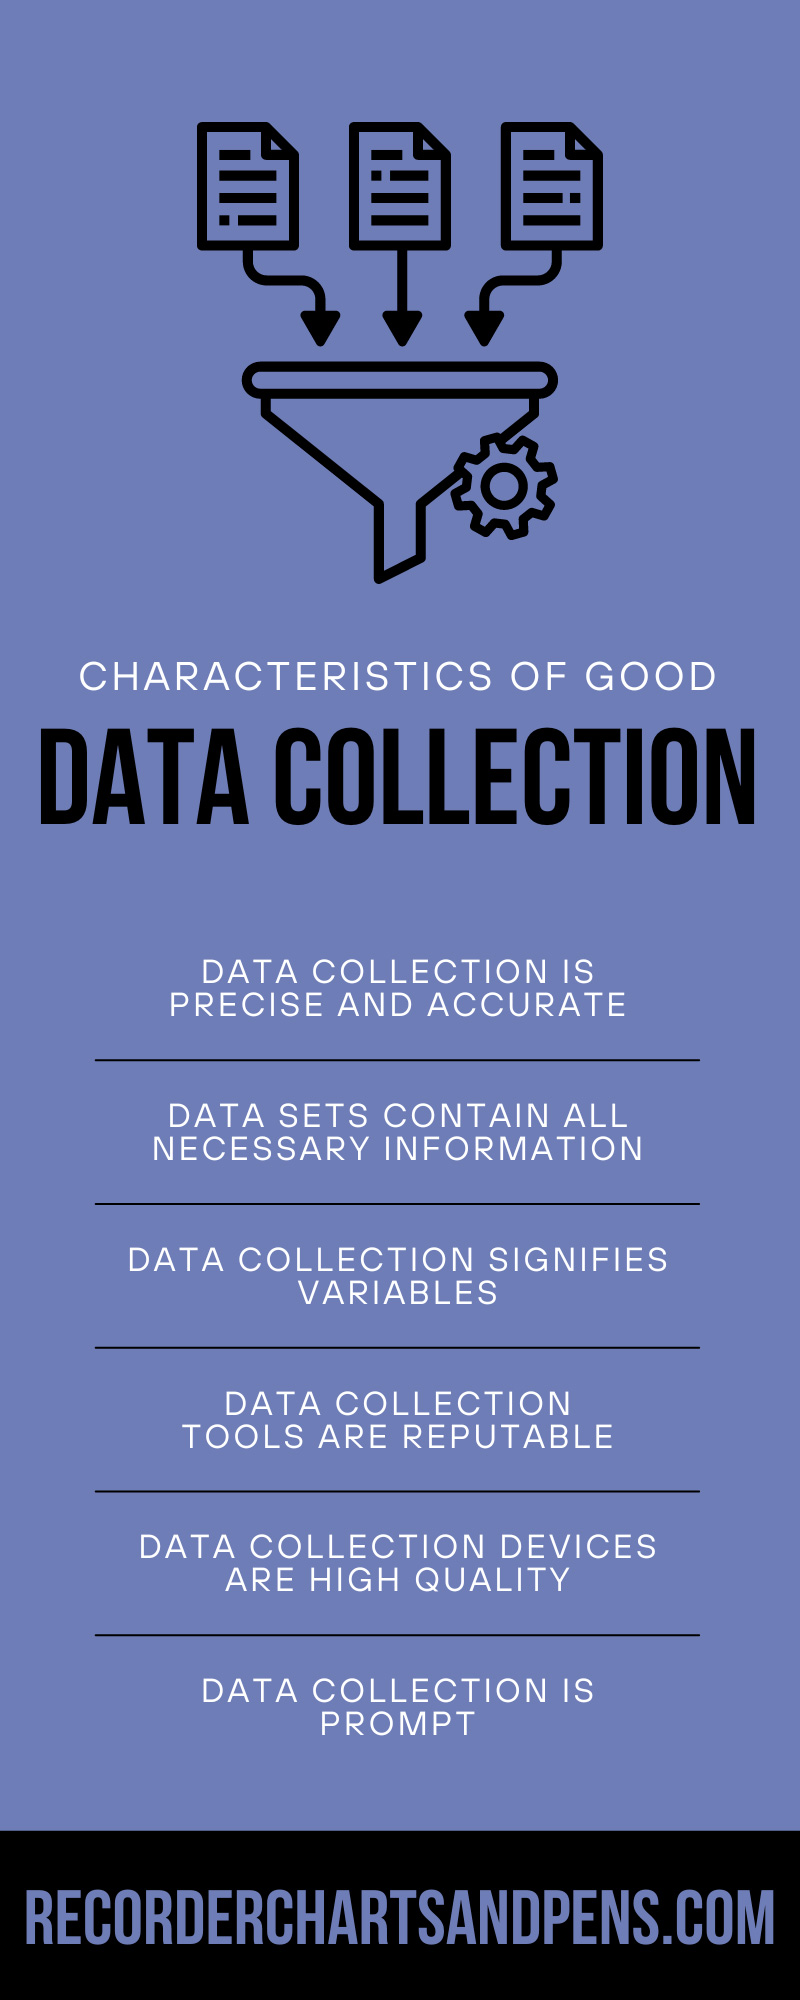 6 Characteristics of Good Data Collection